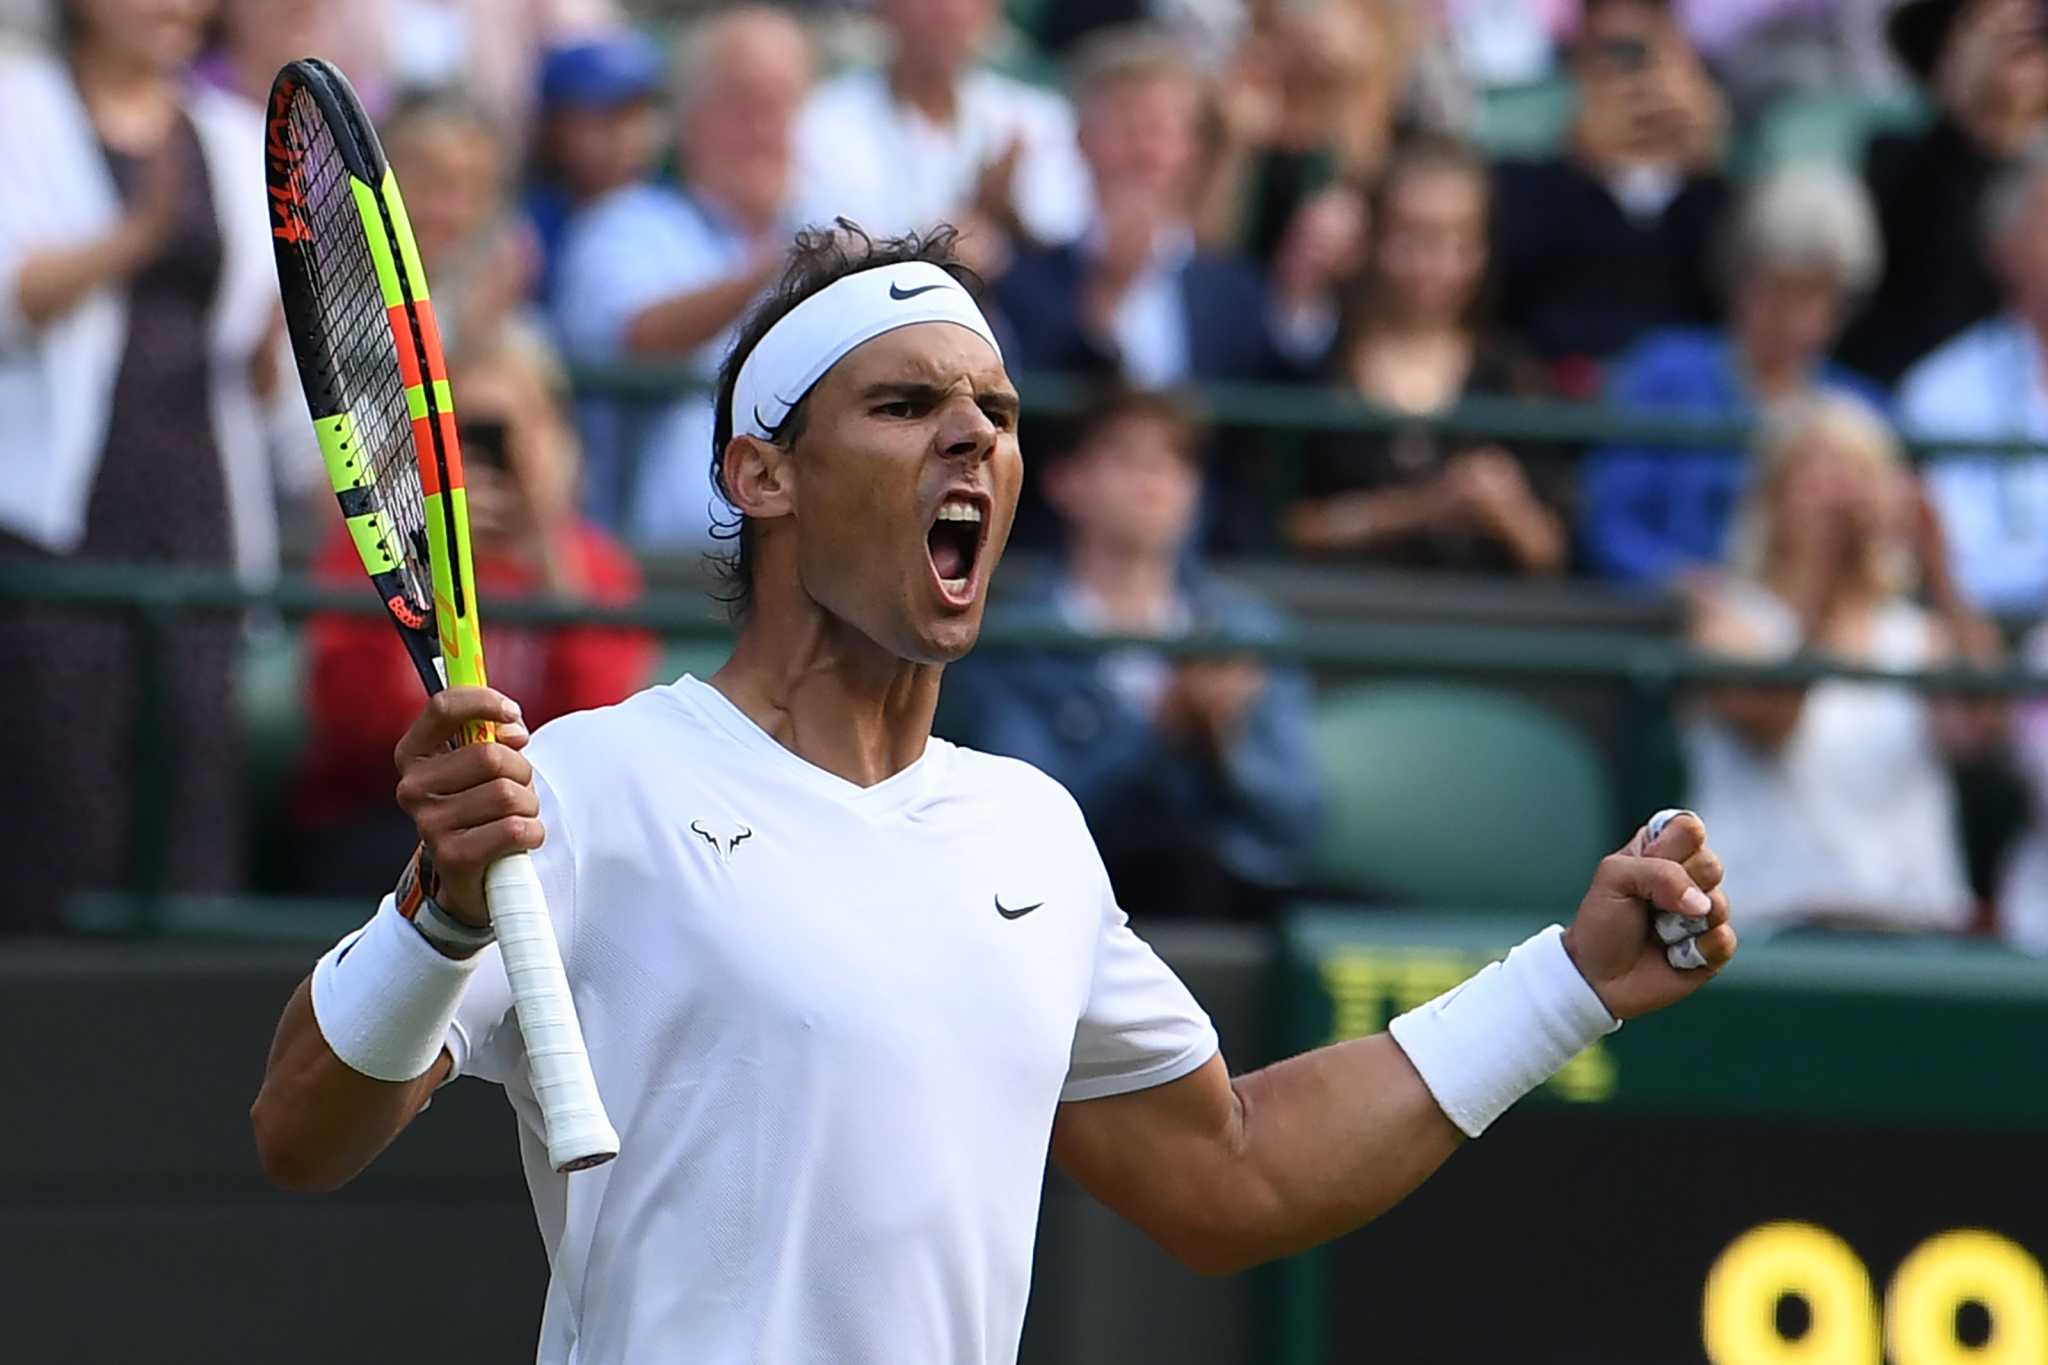 Rafael Nadal sets up rematch with Roger Federer at Wimbledon semifinals - Houston ...